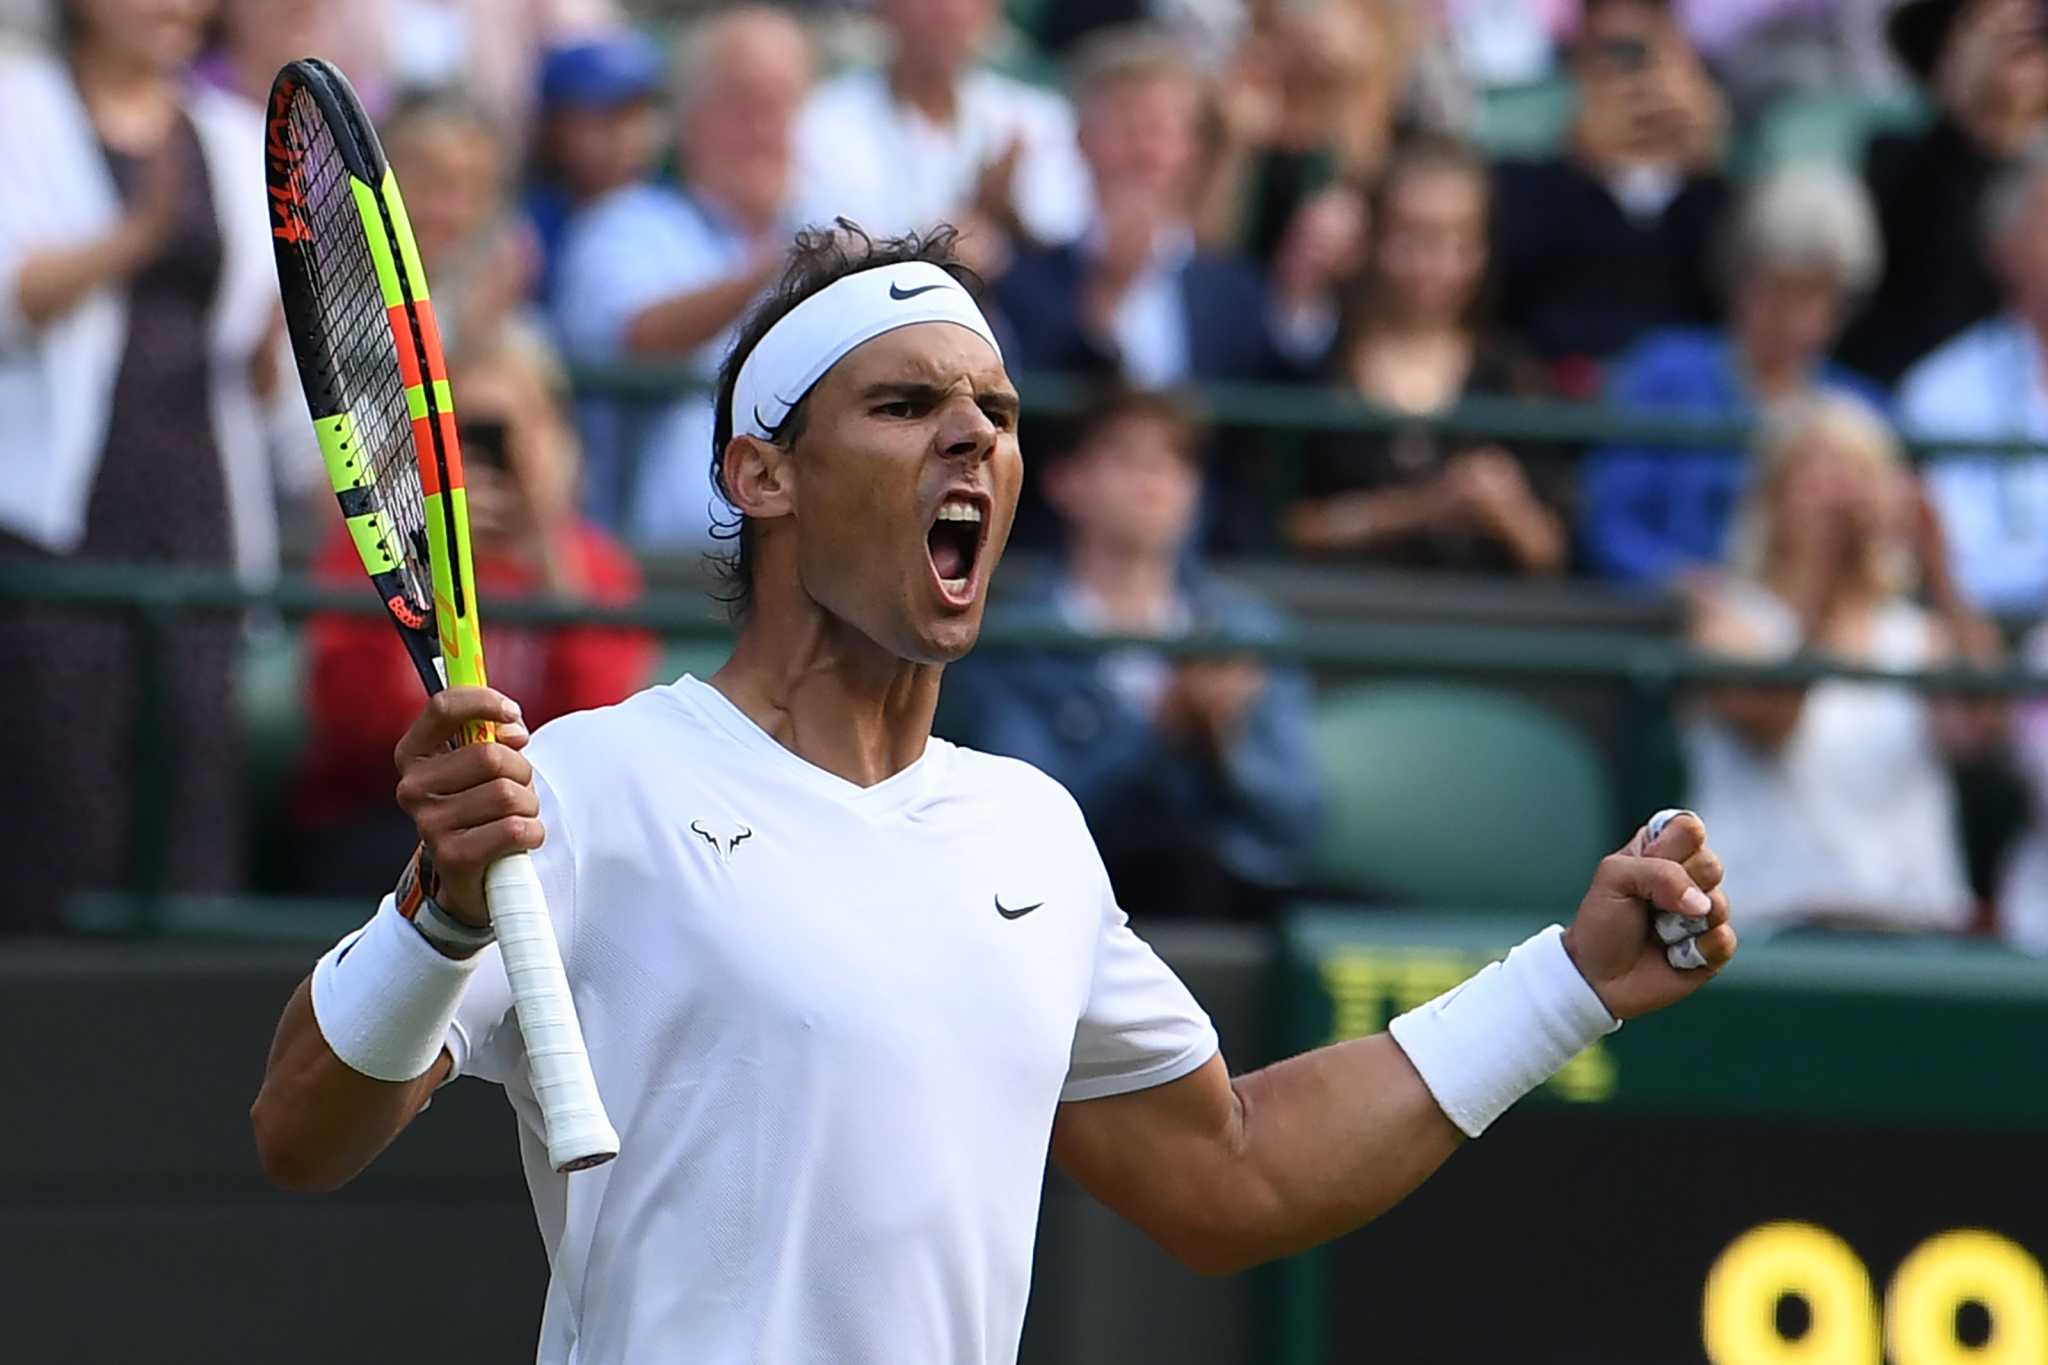 Rafael Nadal sets up rematch with Roger Federer at Wimbledon semifinals - Houston ...